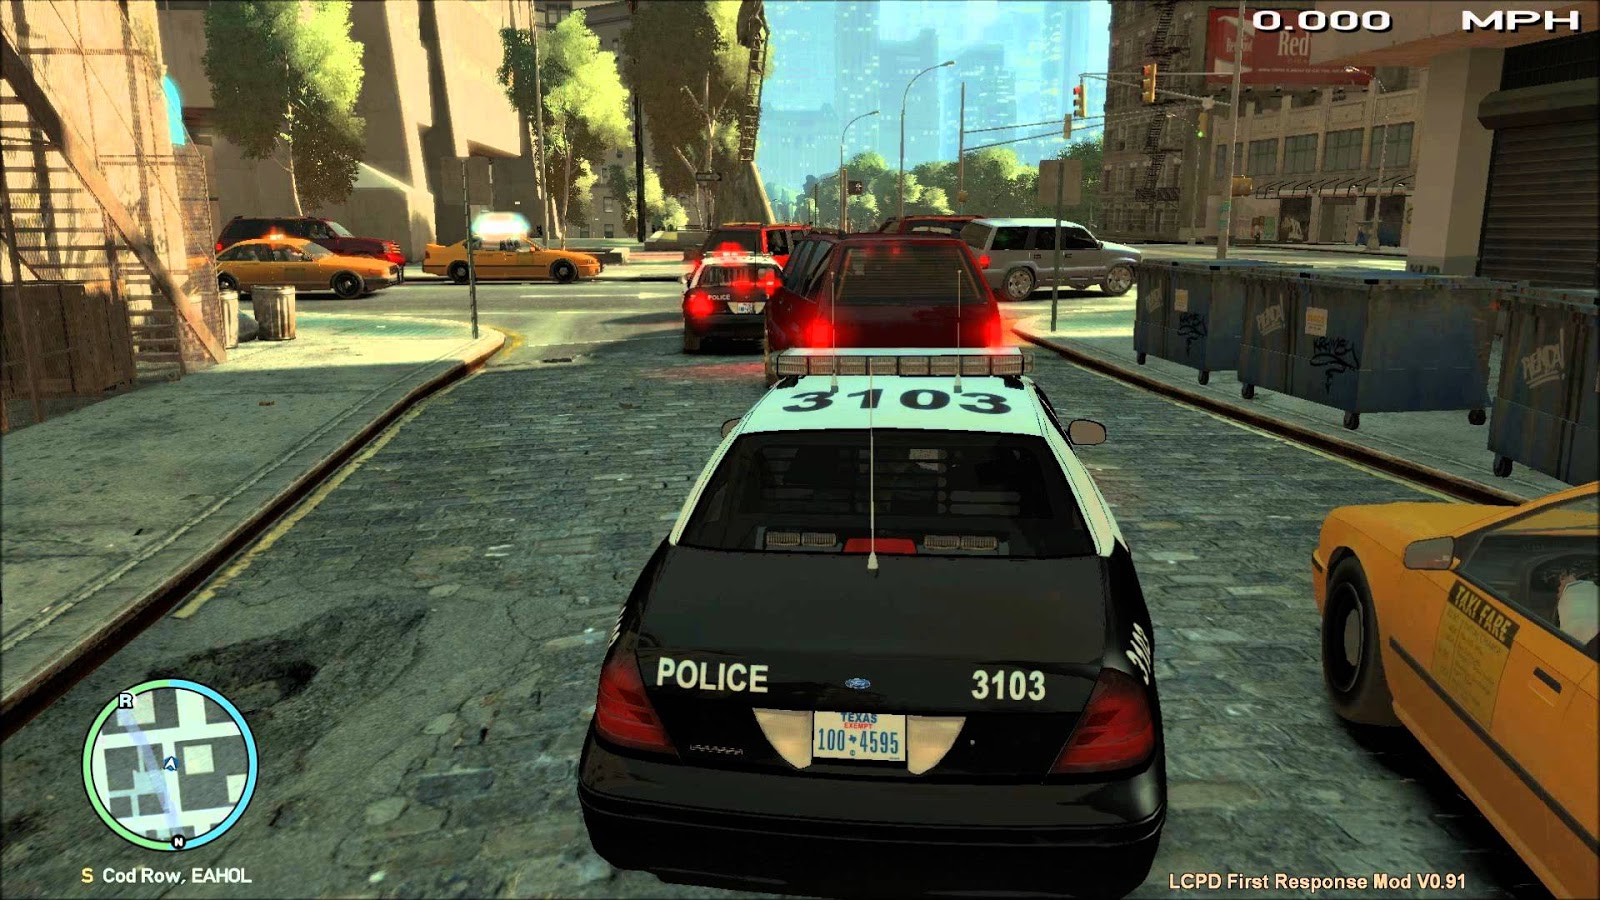 Gta 4 highly compressed pc game download games